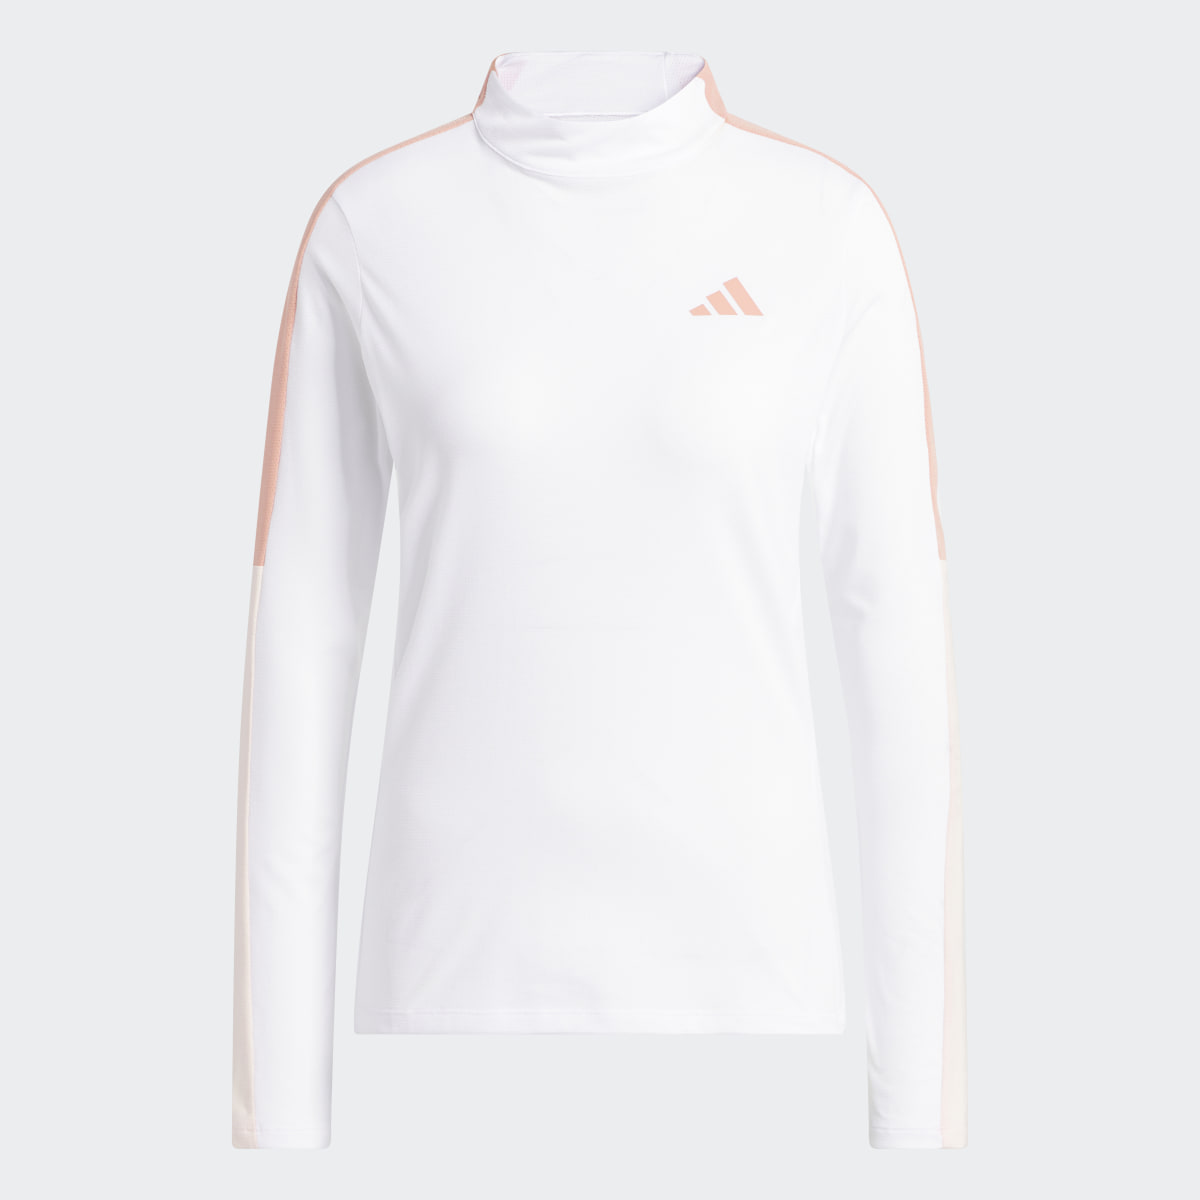 Adidas T-shirt Made With Nature Mock Neck. 5